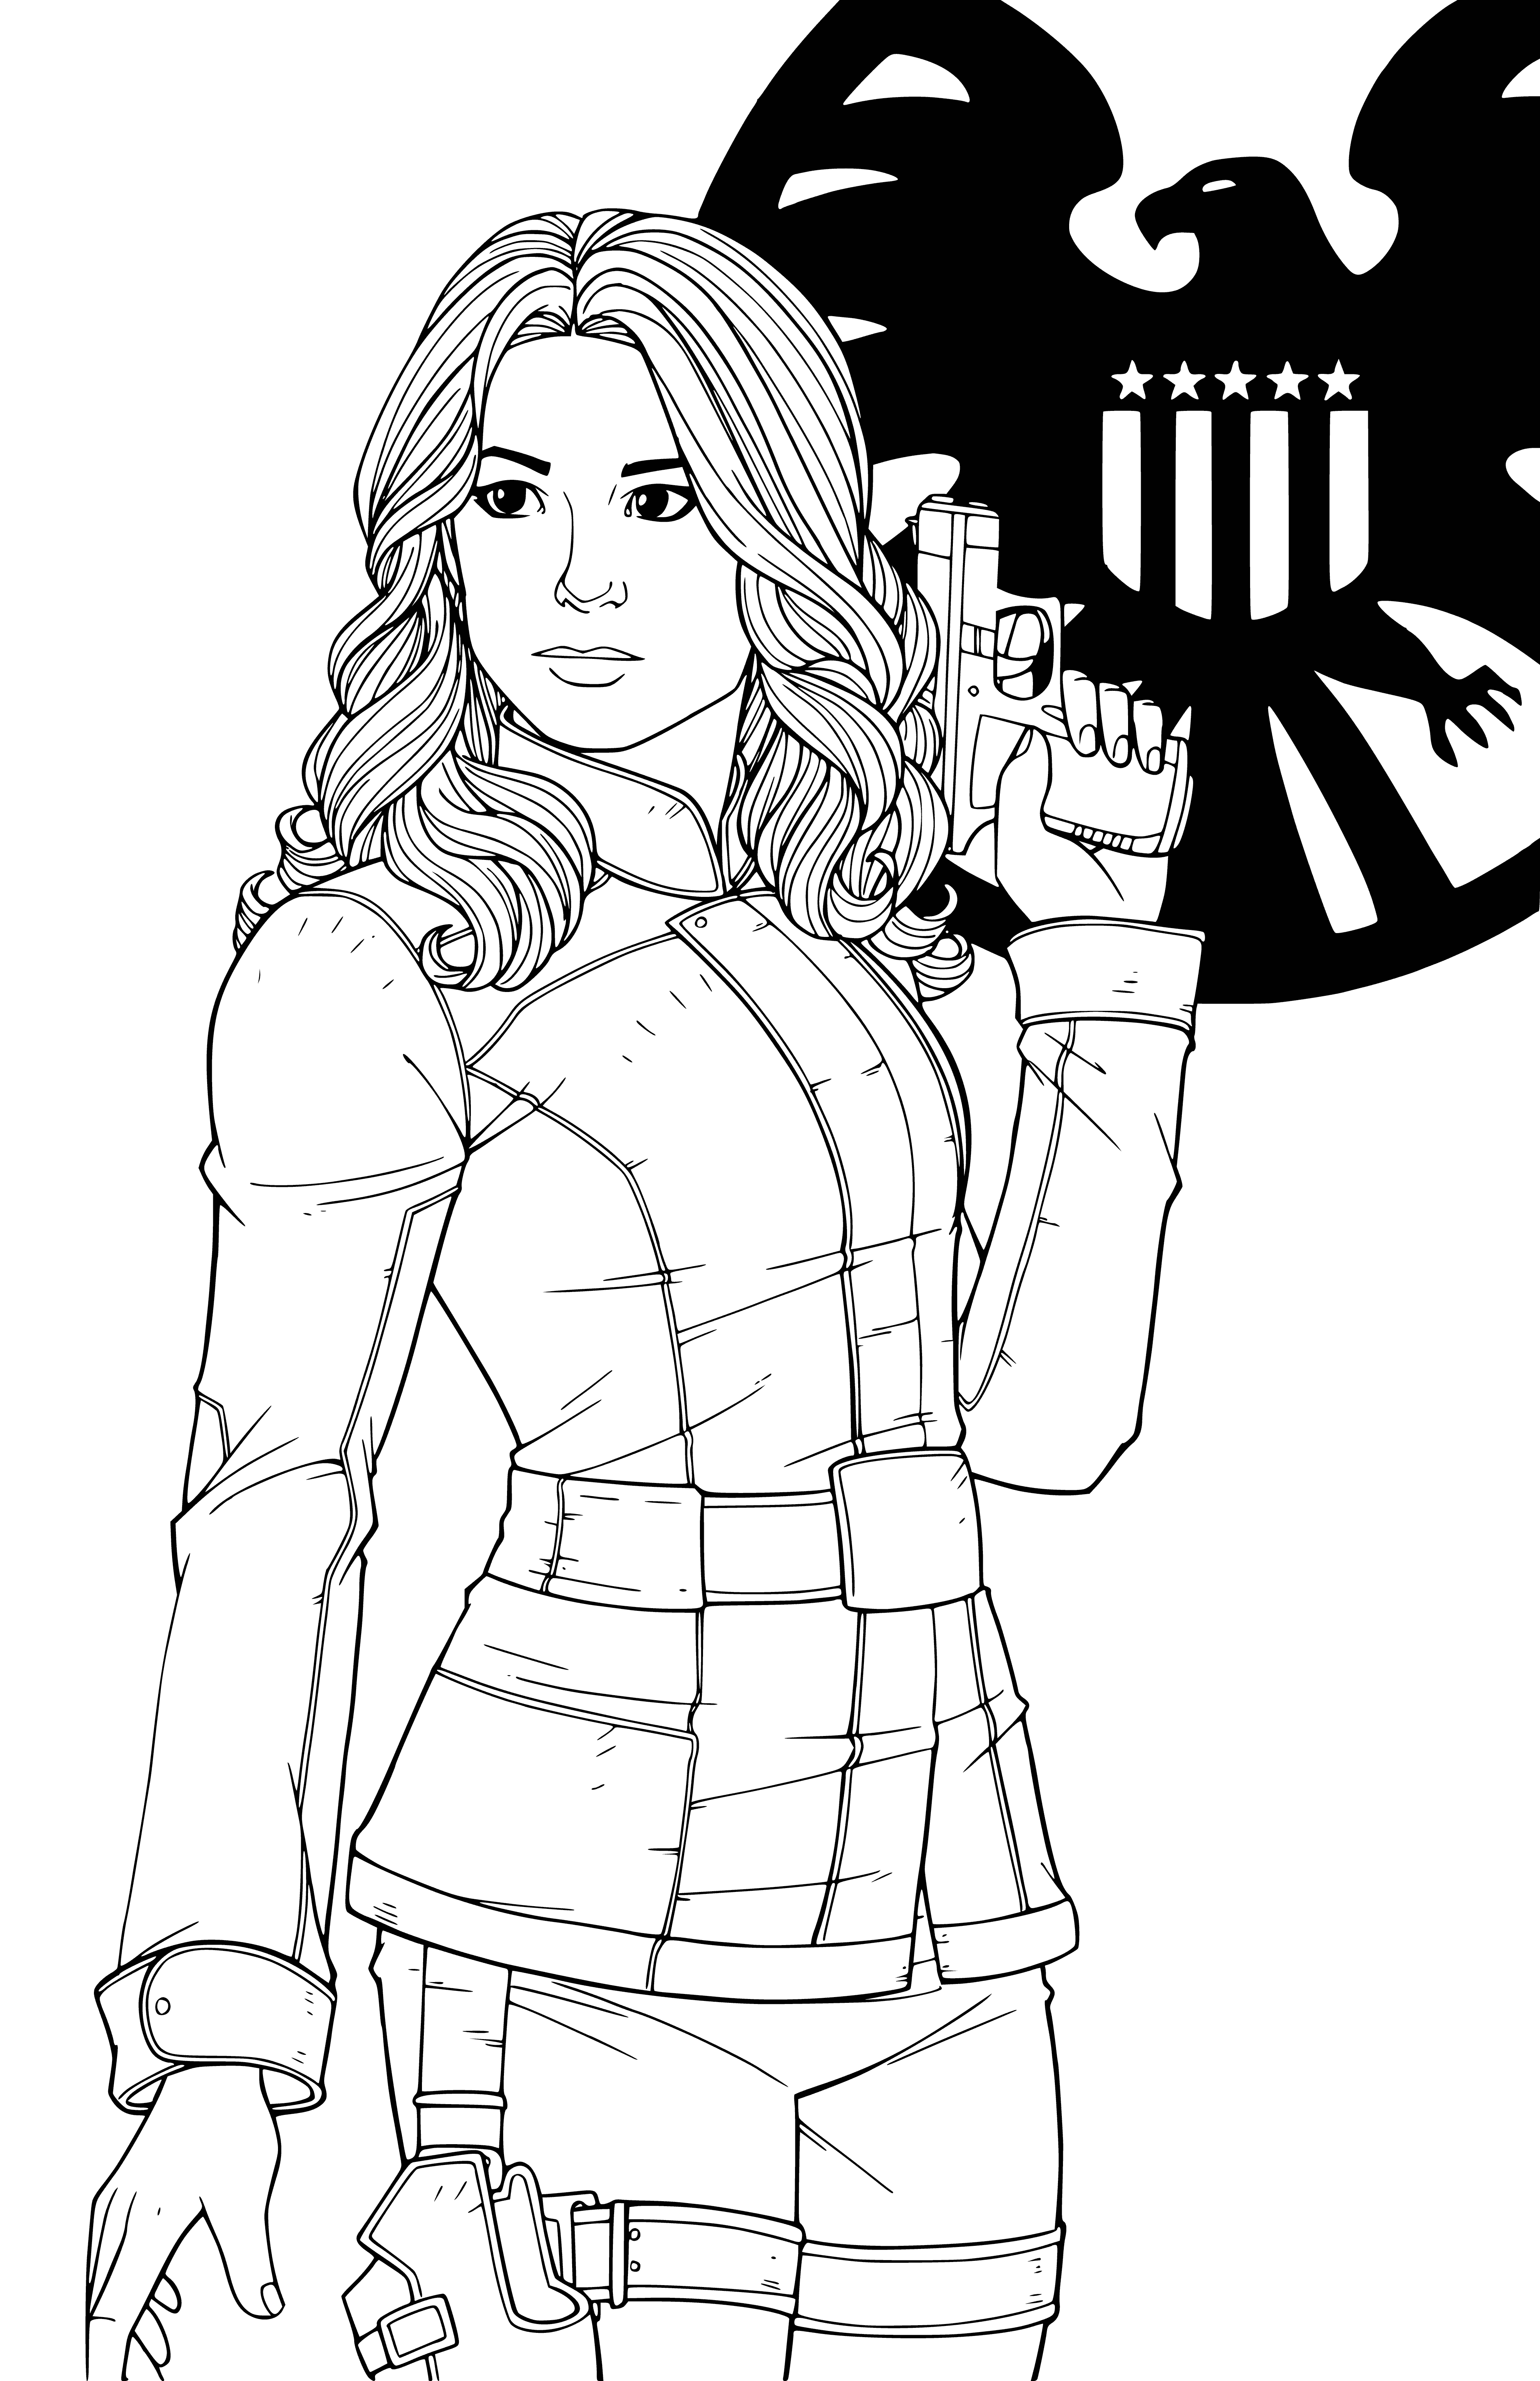 coloring page: Secret agent S.H.I.E.L.D. Sharon Carter stands in a fighting stance; form-fitting black bodysuit, green utility belt, black boots, long red hair blowing in the wind. Ready to take on anything!